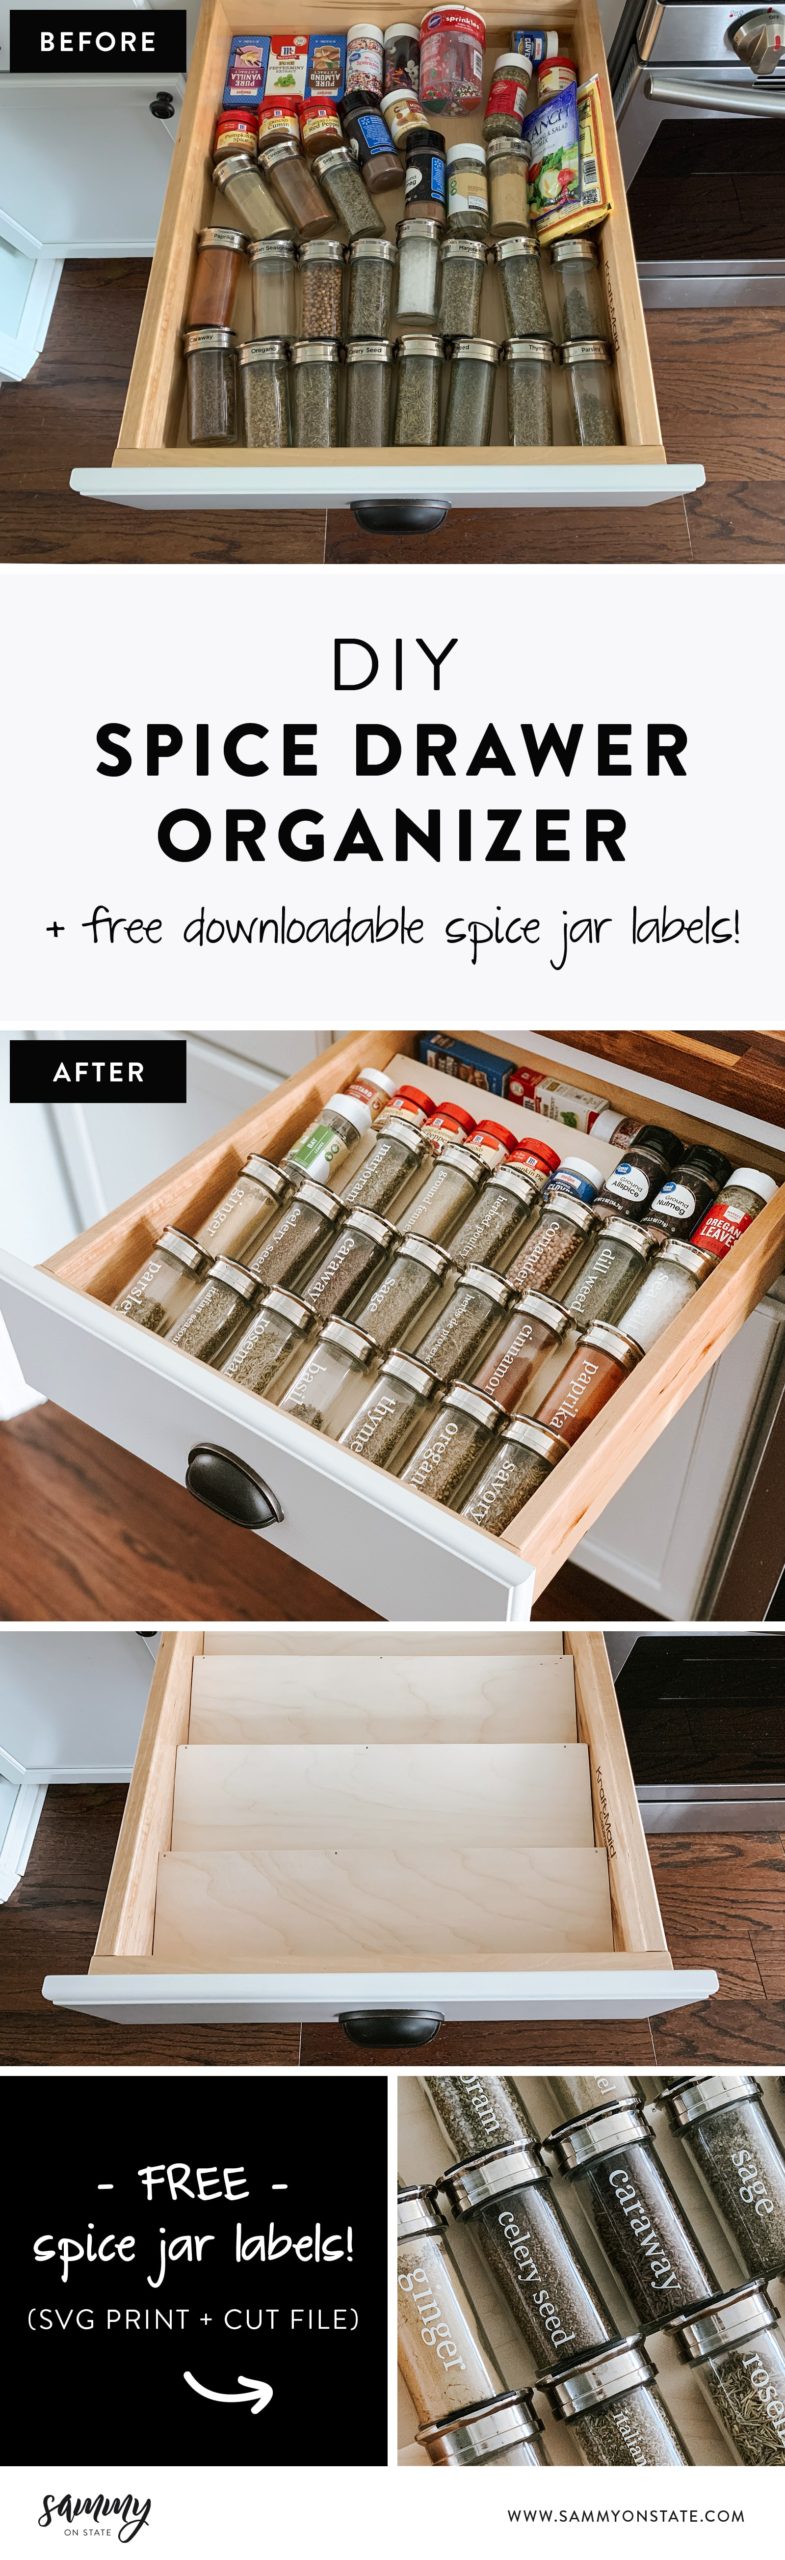 Easy Diy Spice Drawer Organizer, How To Build A In Cabinet Spice Rack